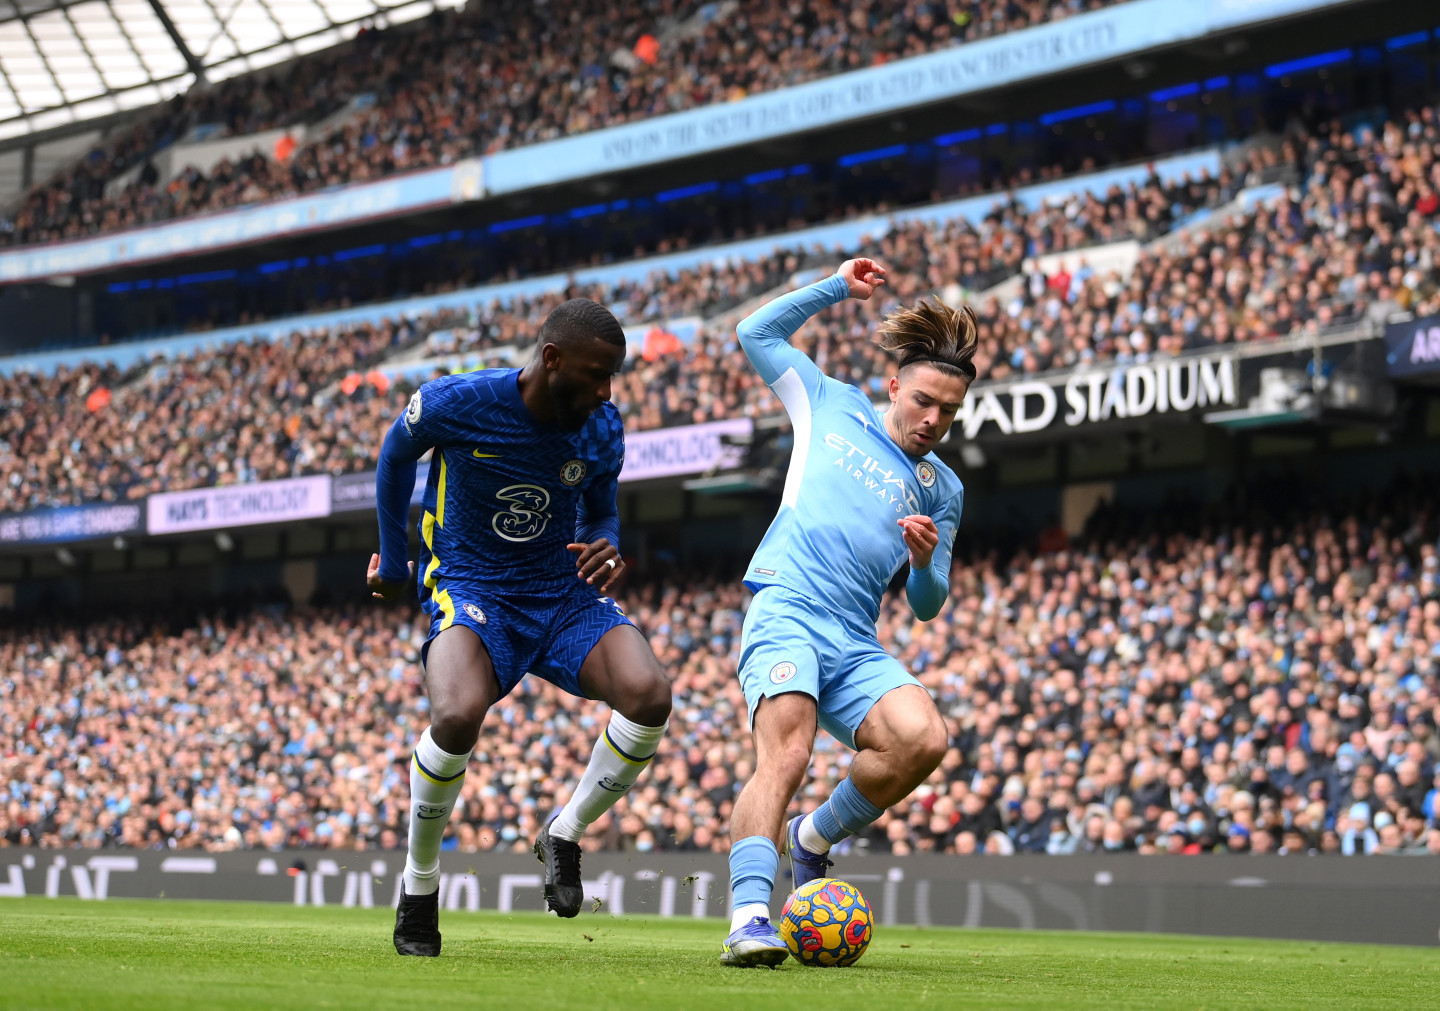 Match report: Chelsea 0 Man City 1, News, Official Site